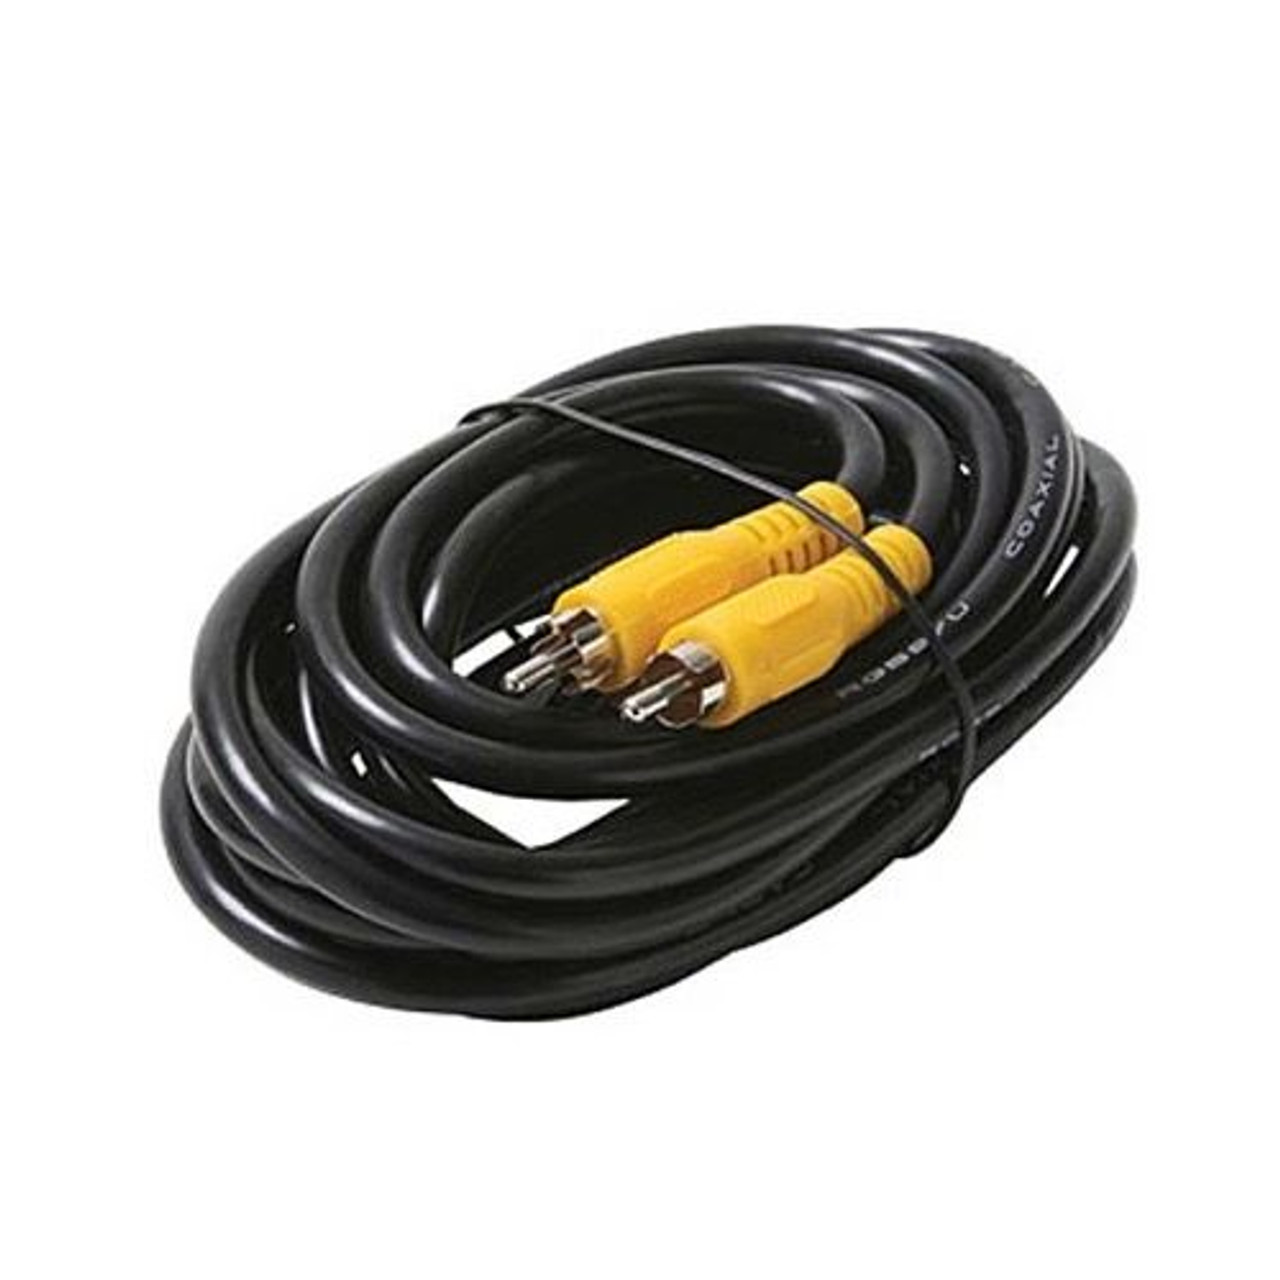 Steren 216-112BK 12' FT RCA Plug Male Connector Each End Composite Video Interconnect Cable RG59 Coaxial Cable Shielded RCA Male to RCA Male A/V Digital Signal Hook-Up Jumper with Yellow Plug Connectors